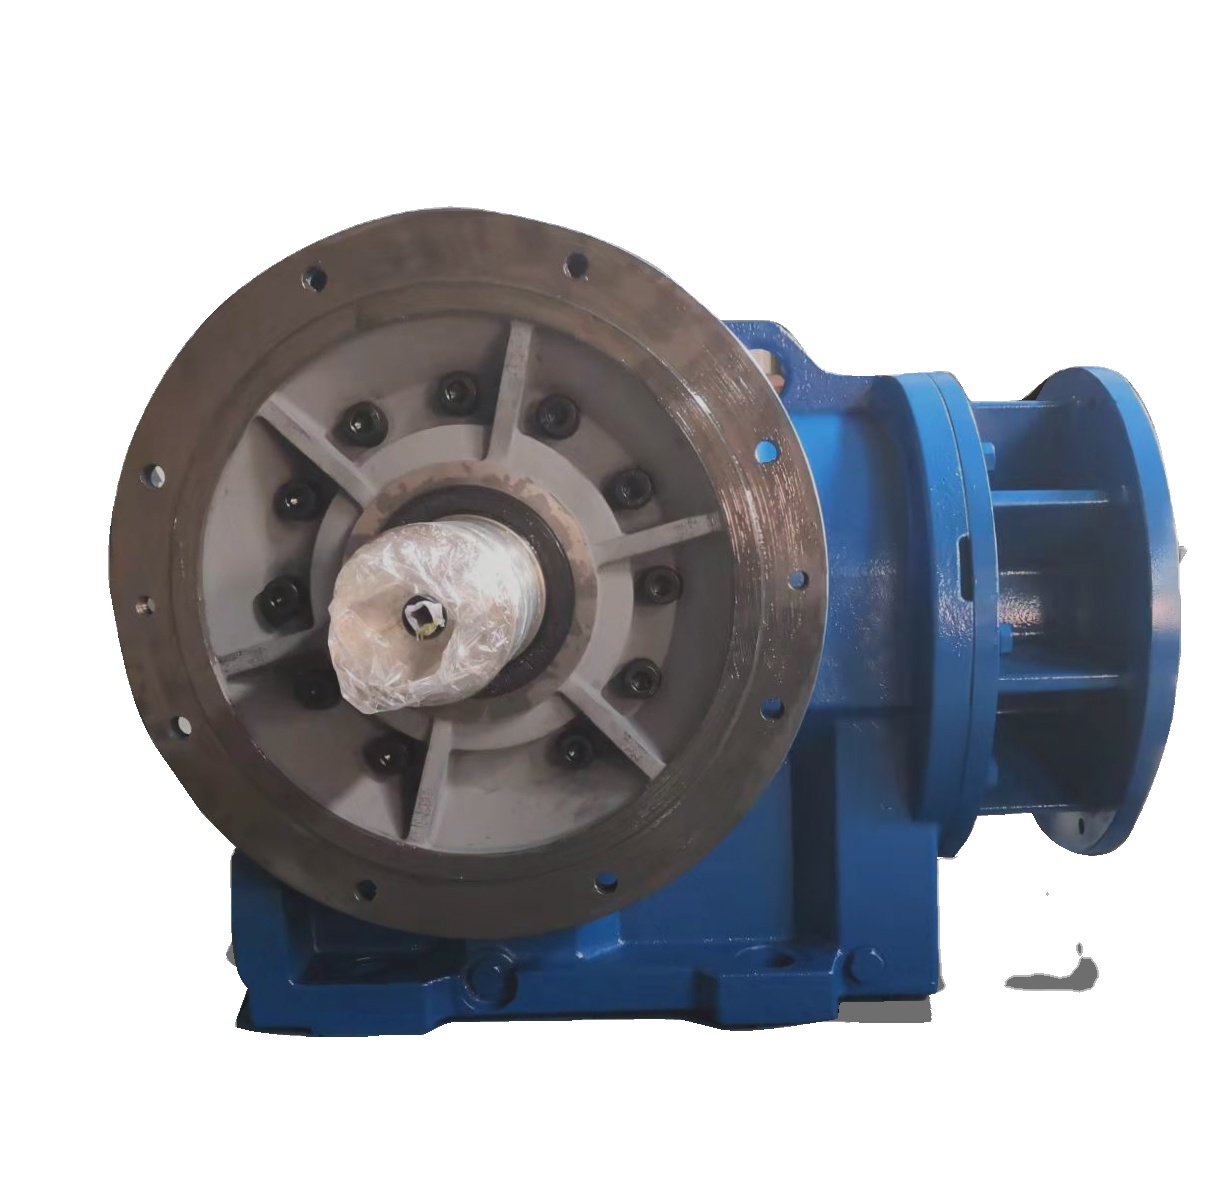 EVERGEAR DRIVE K series right angle gearbox for concrete mixer motor gear reducer